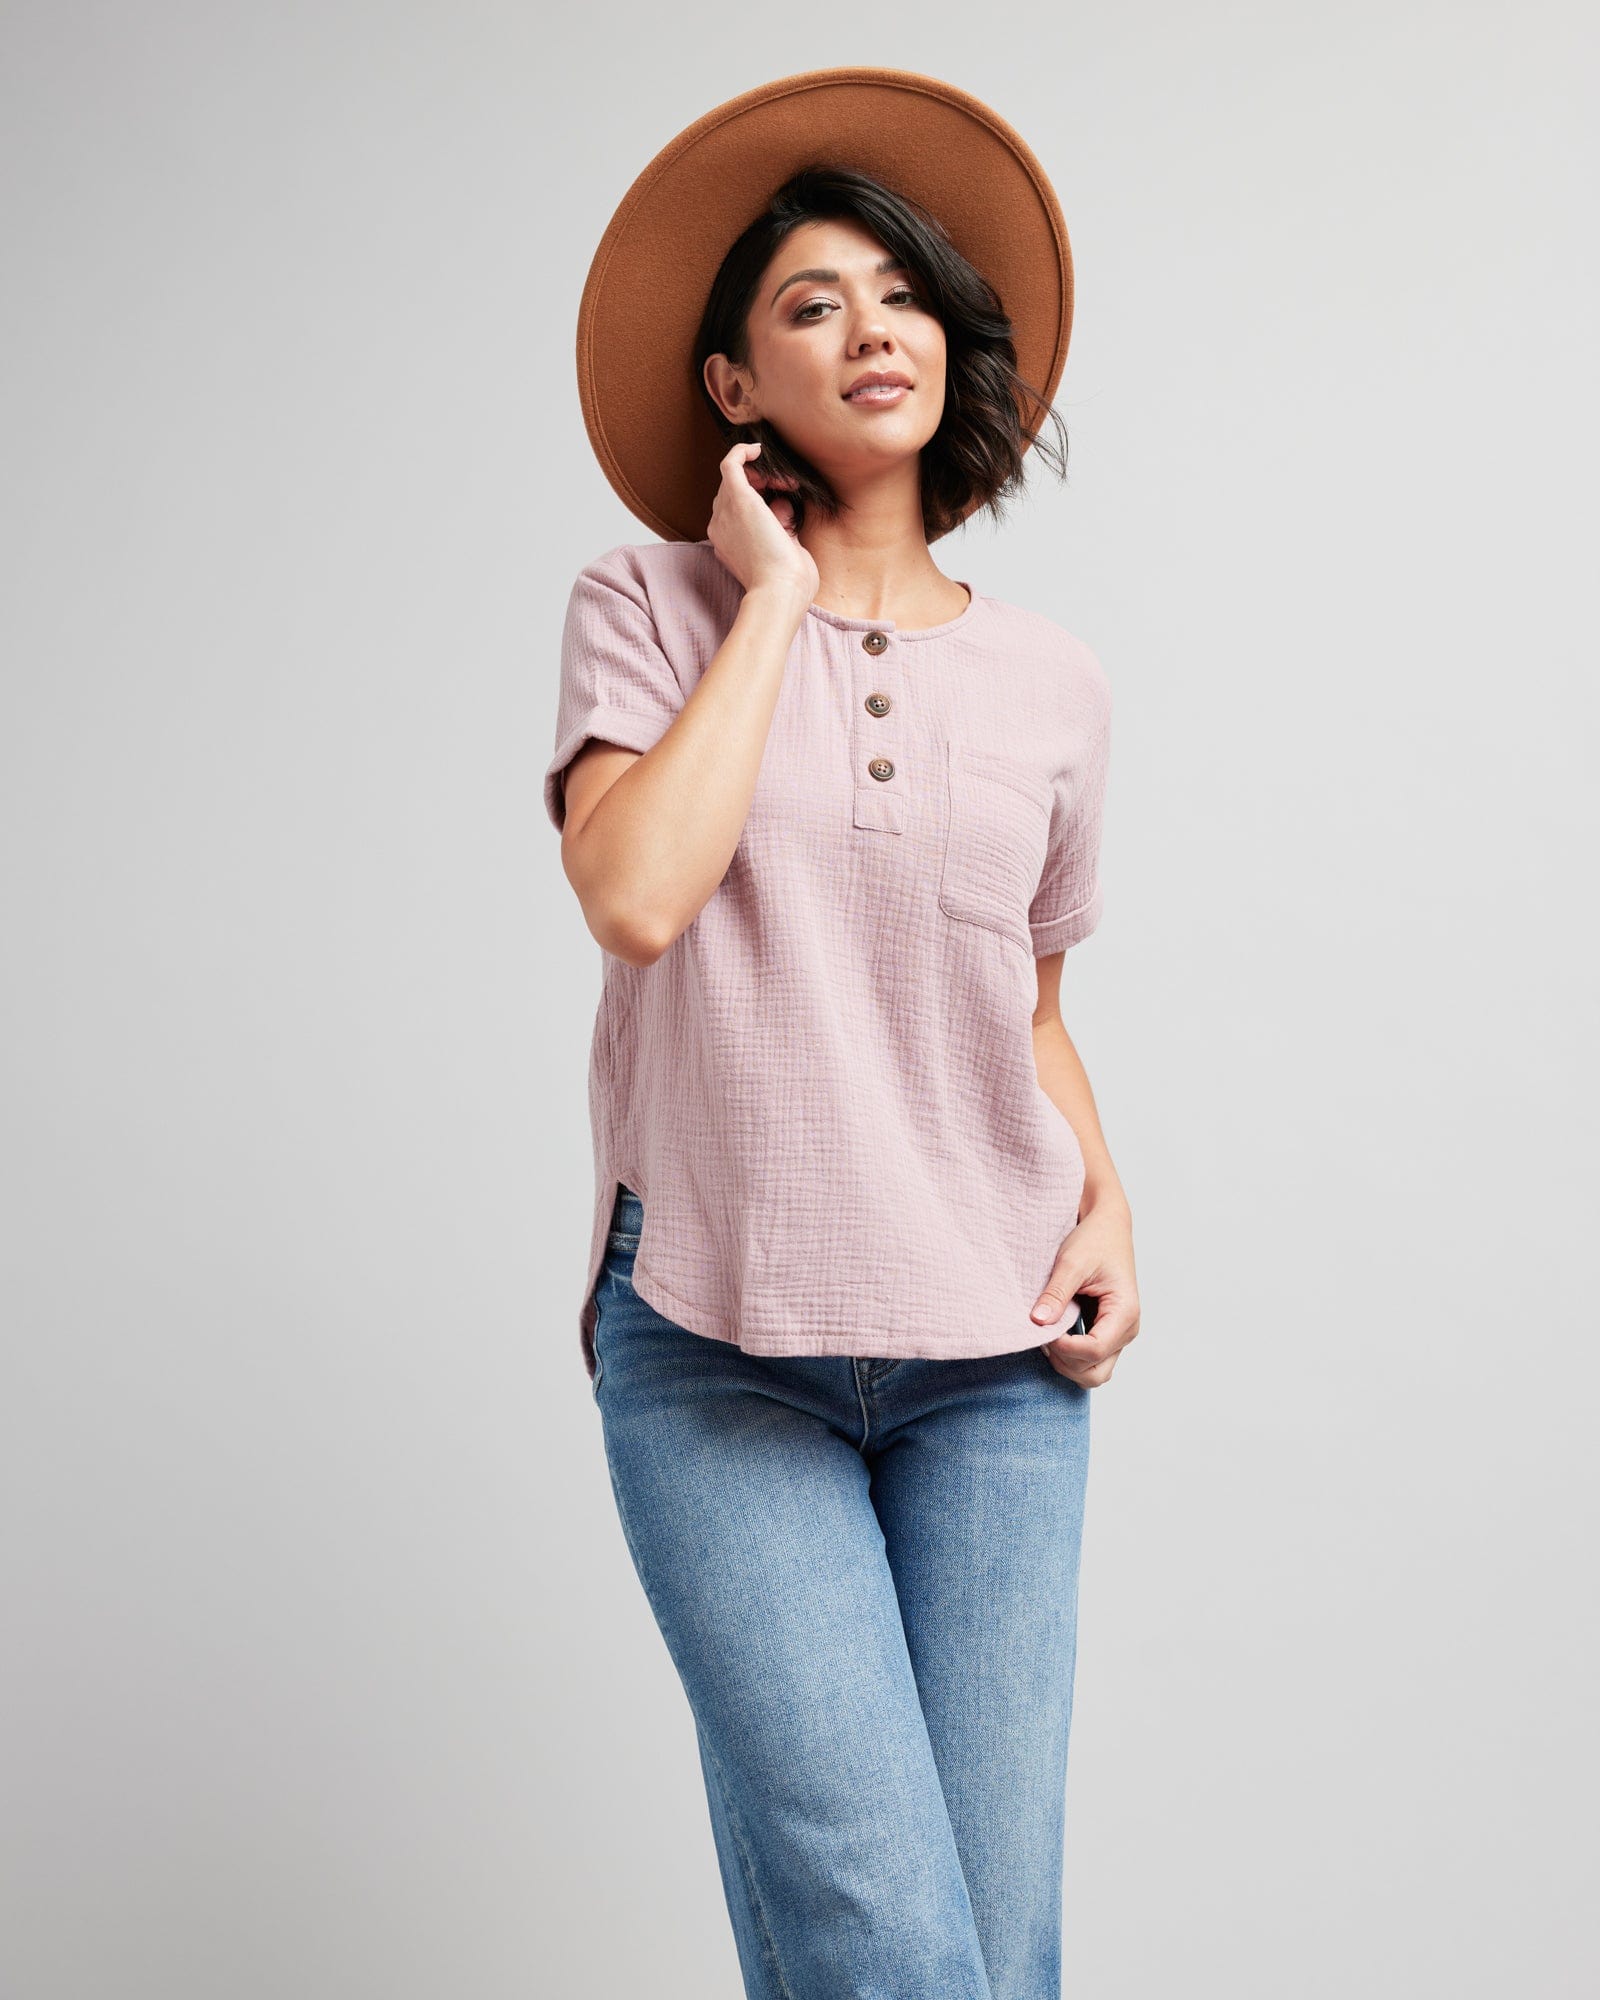 Woman in a short cuffed sleeve blouse with buttons at neckline and a front pocket